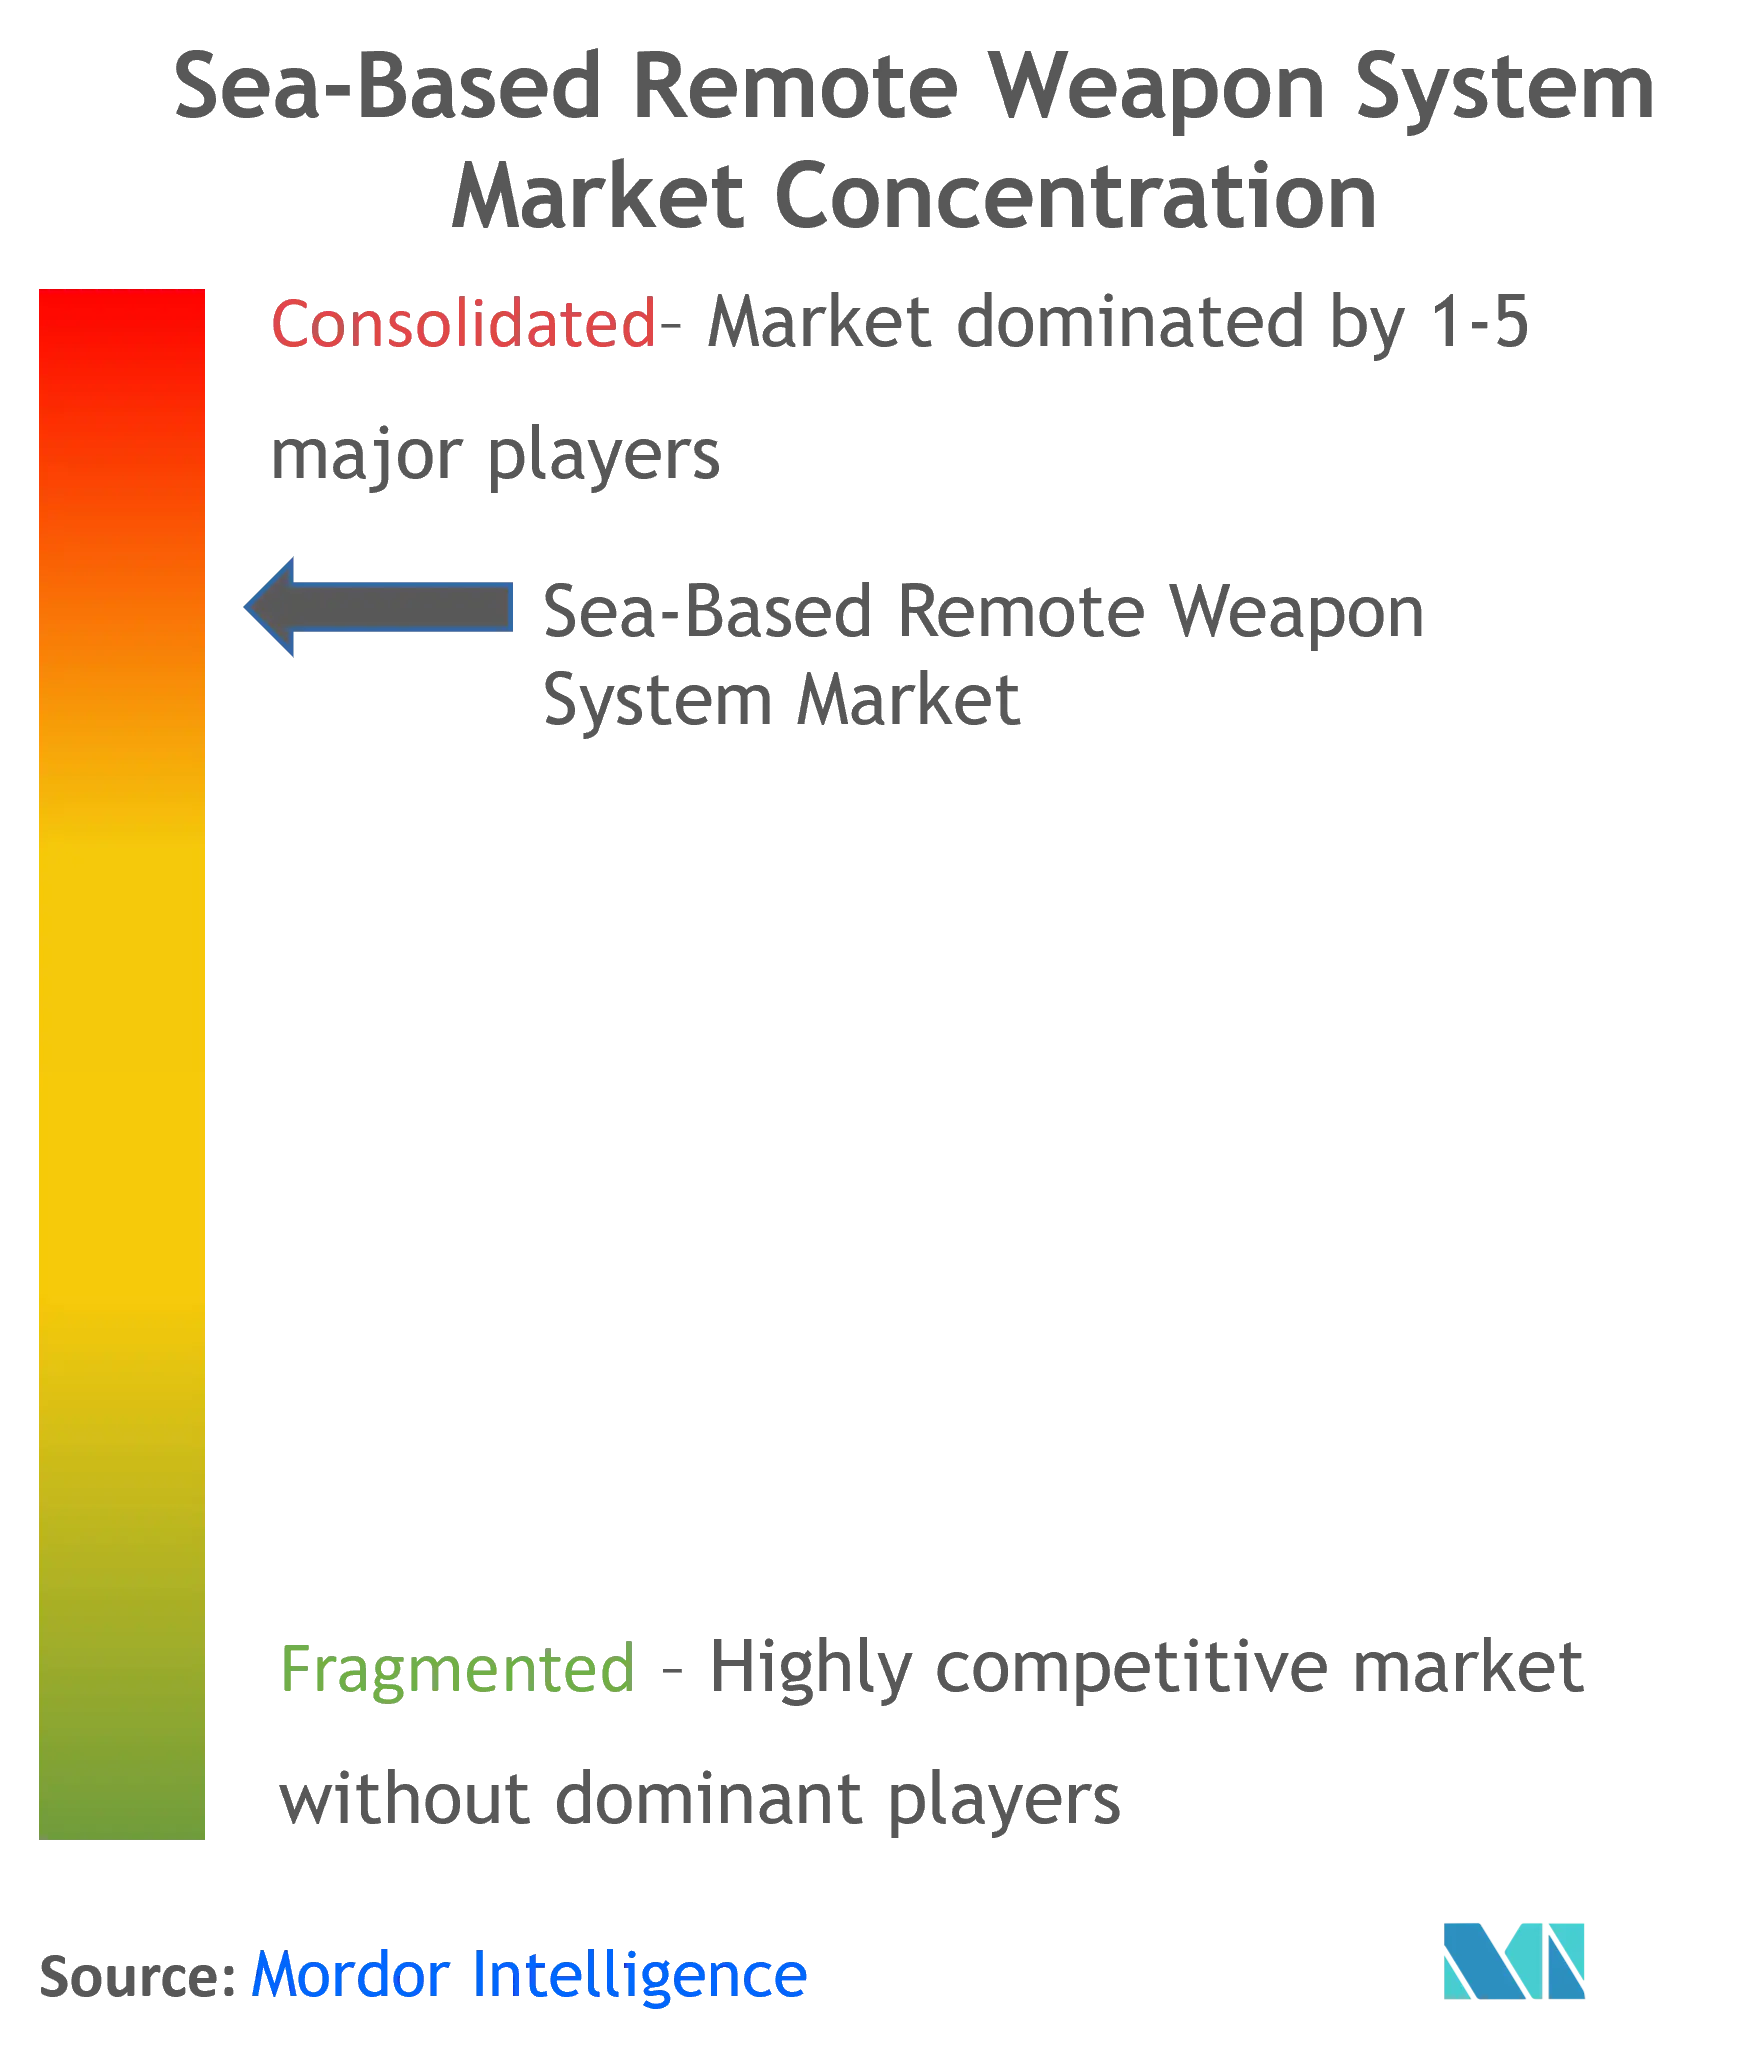 Sea-based Remote Weapon Systems Market Concentration